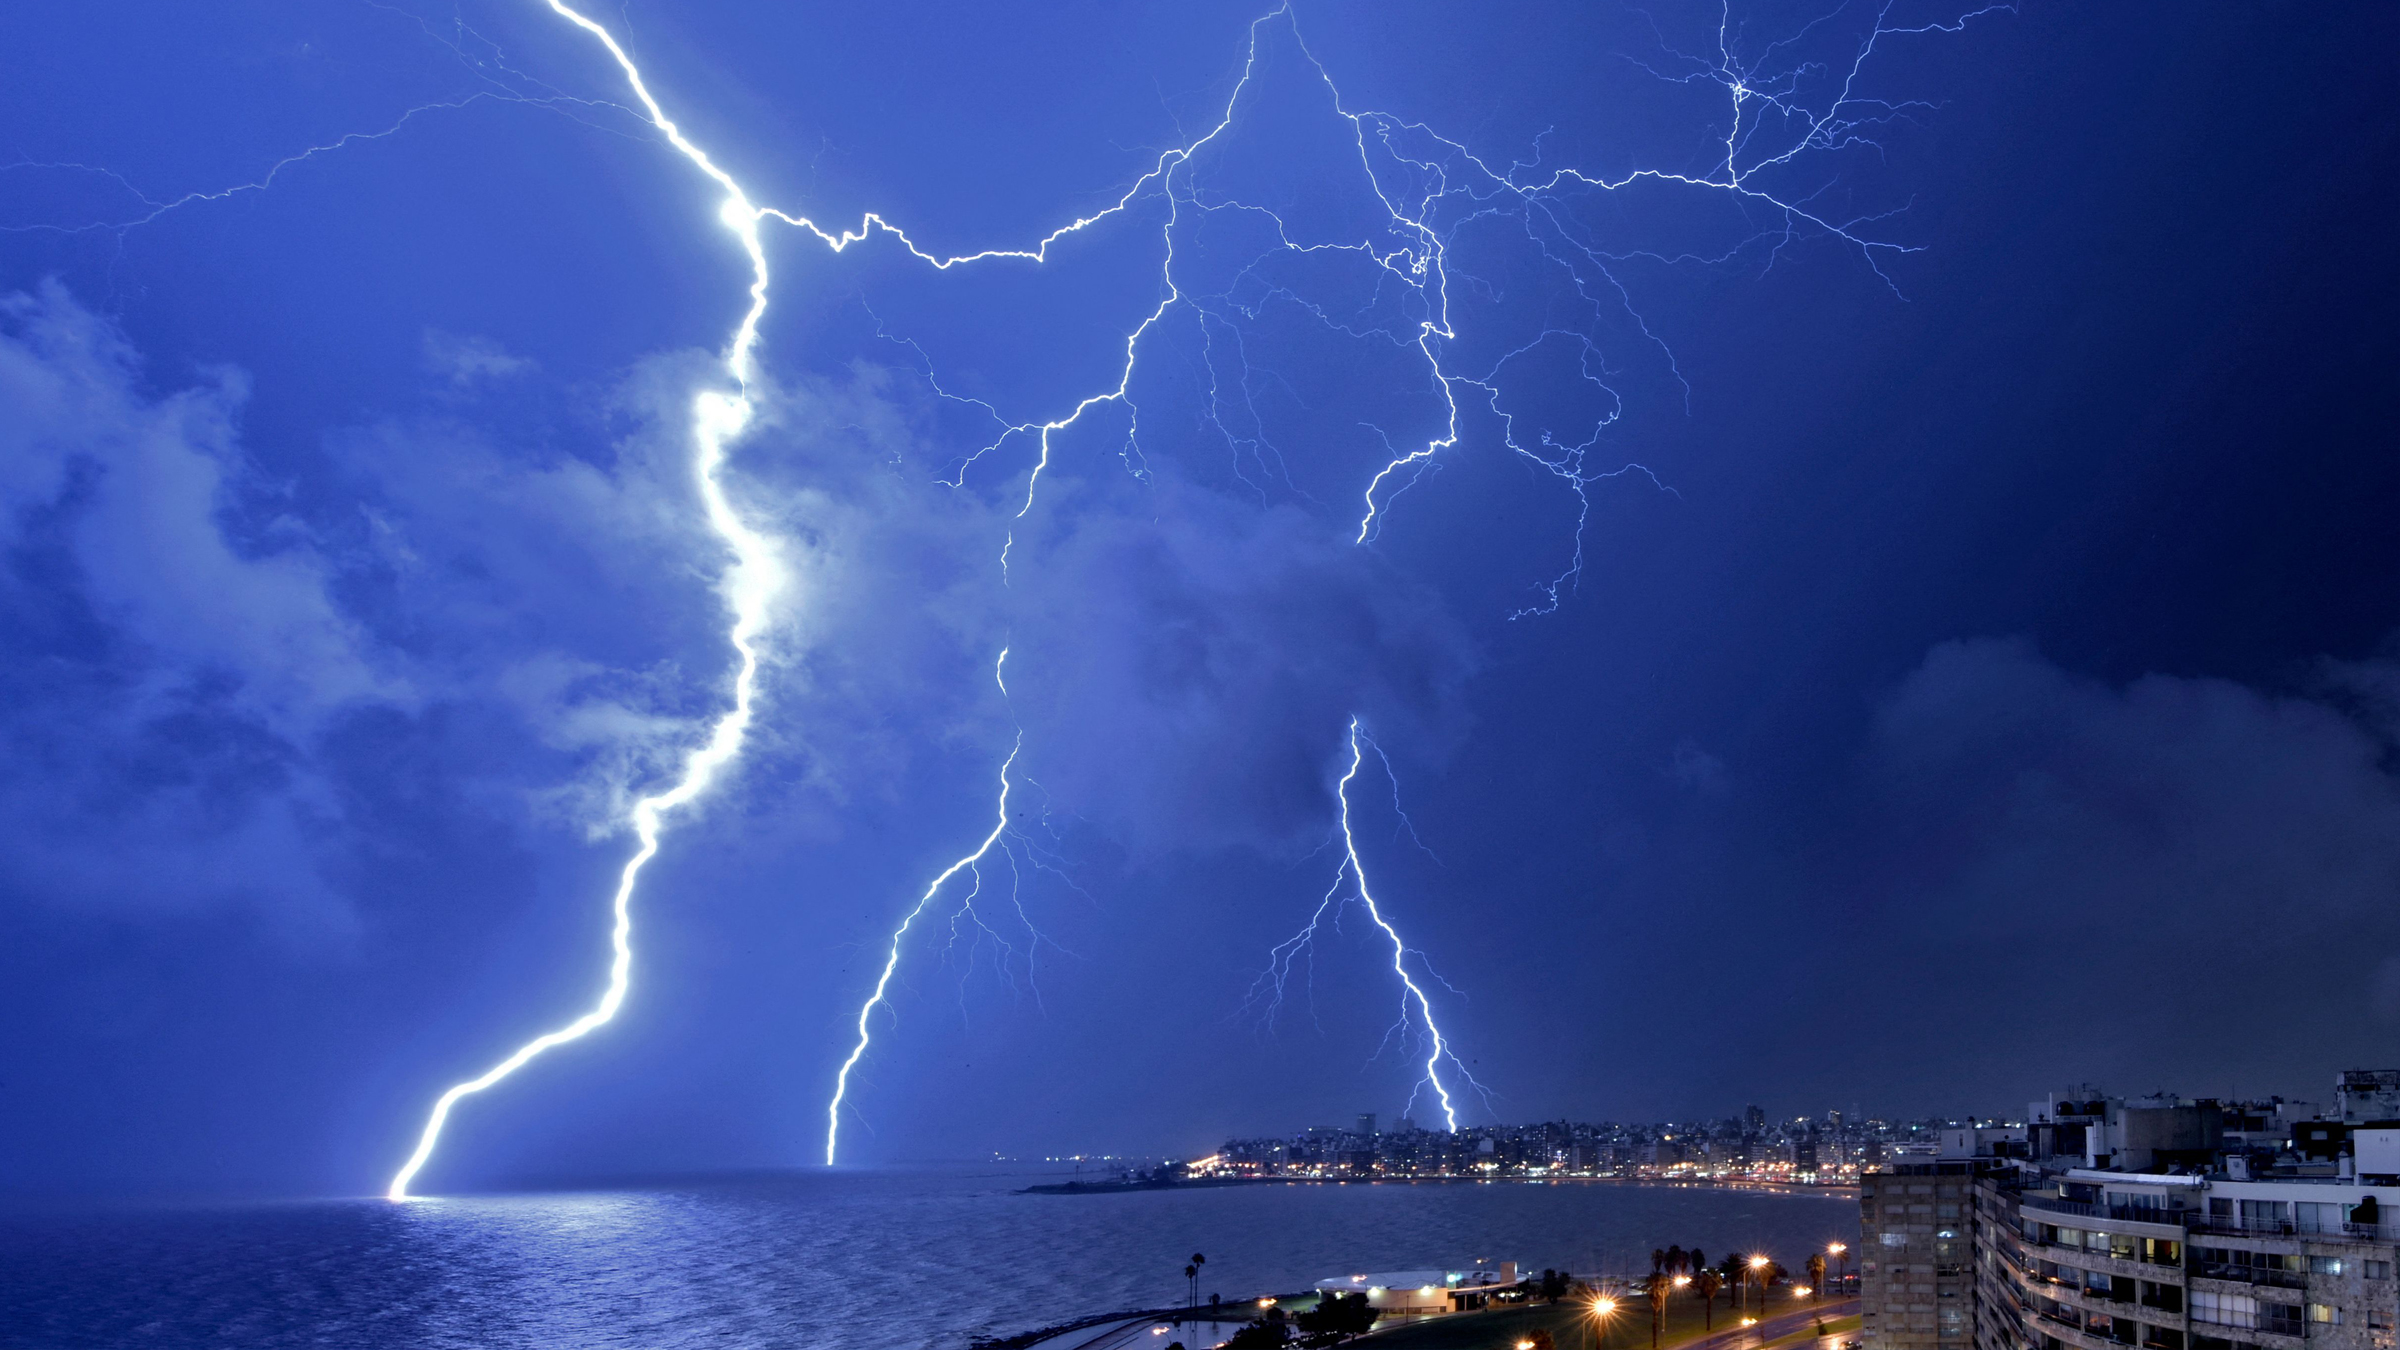 10 Insane Weather Records You Won’t Believe Are Real